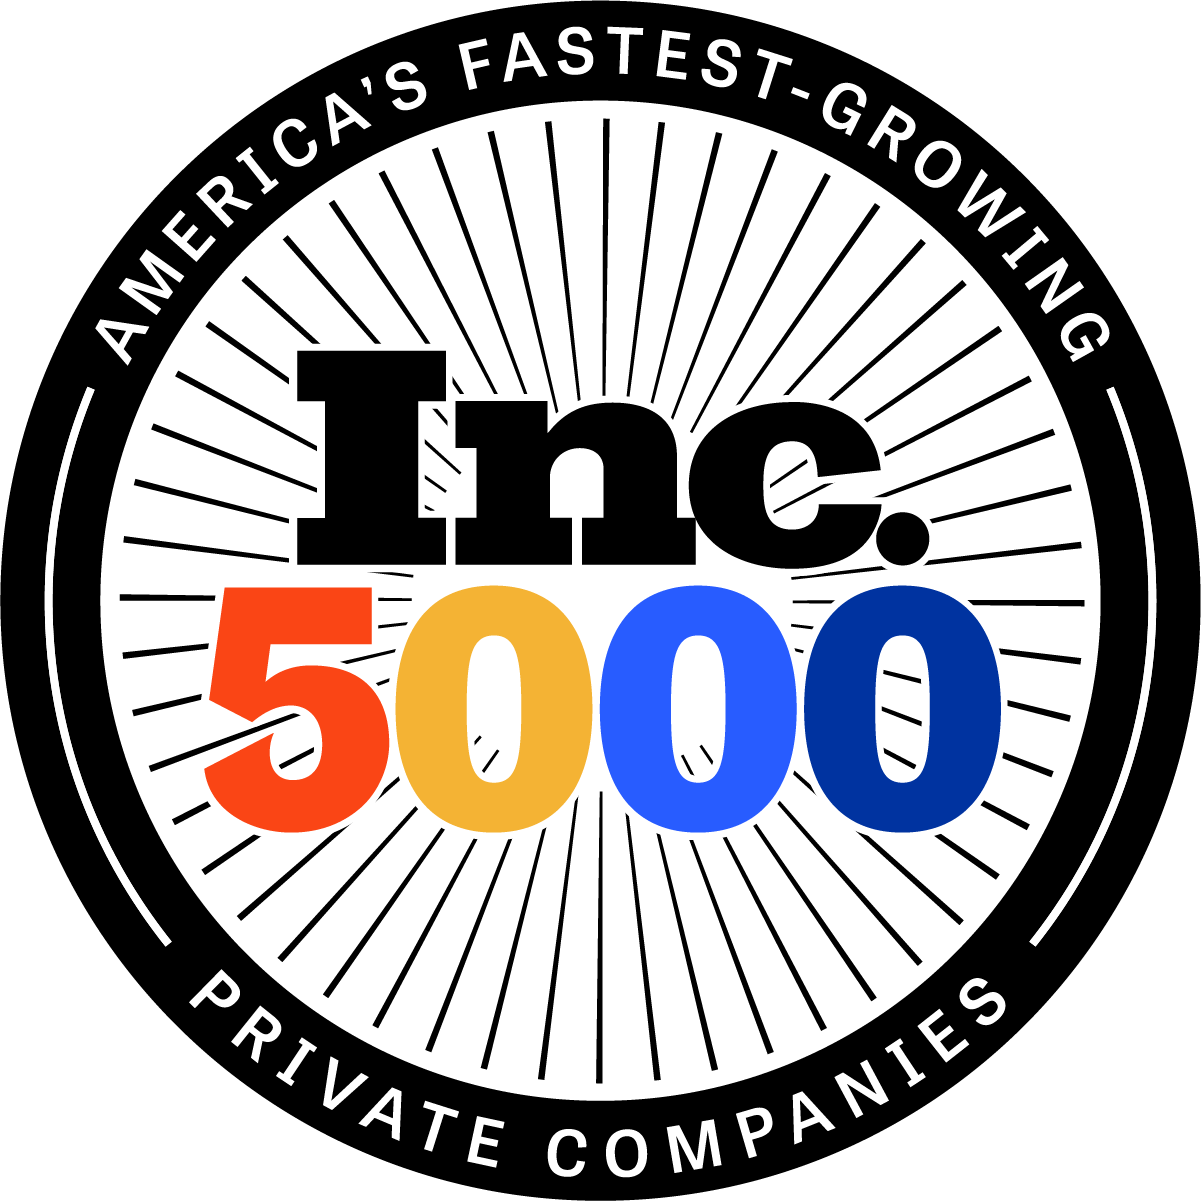 Featured in Inc 5000